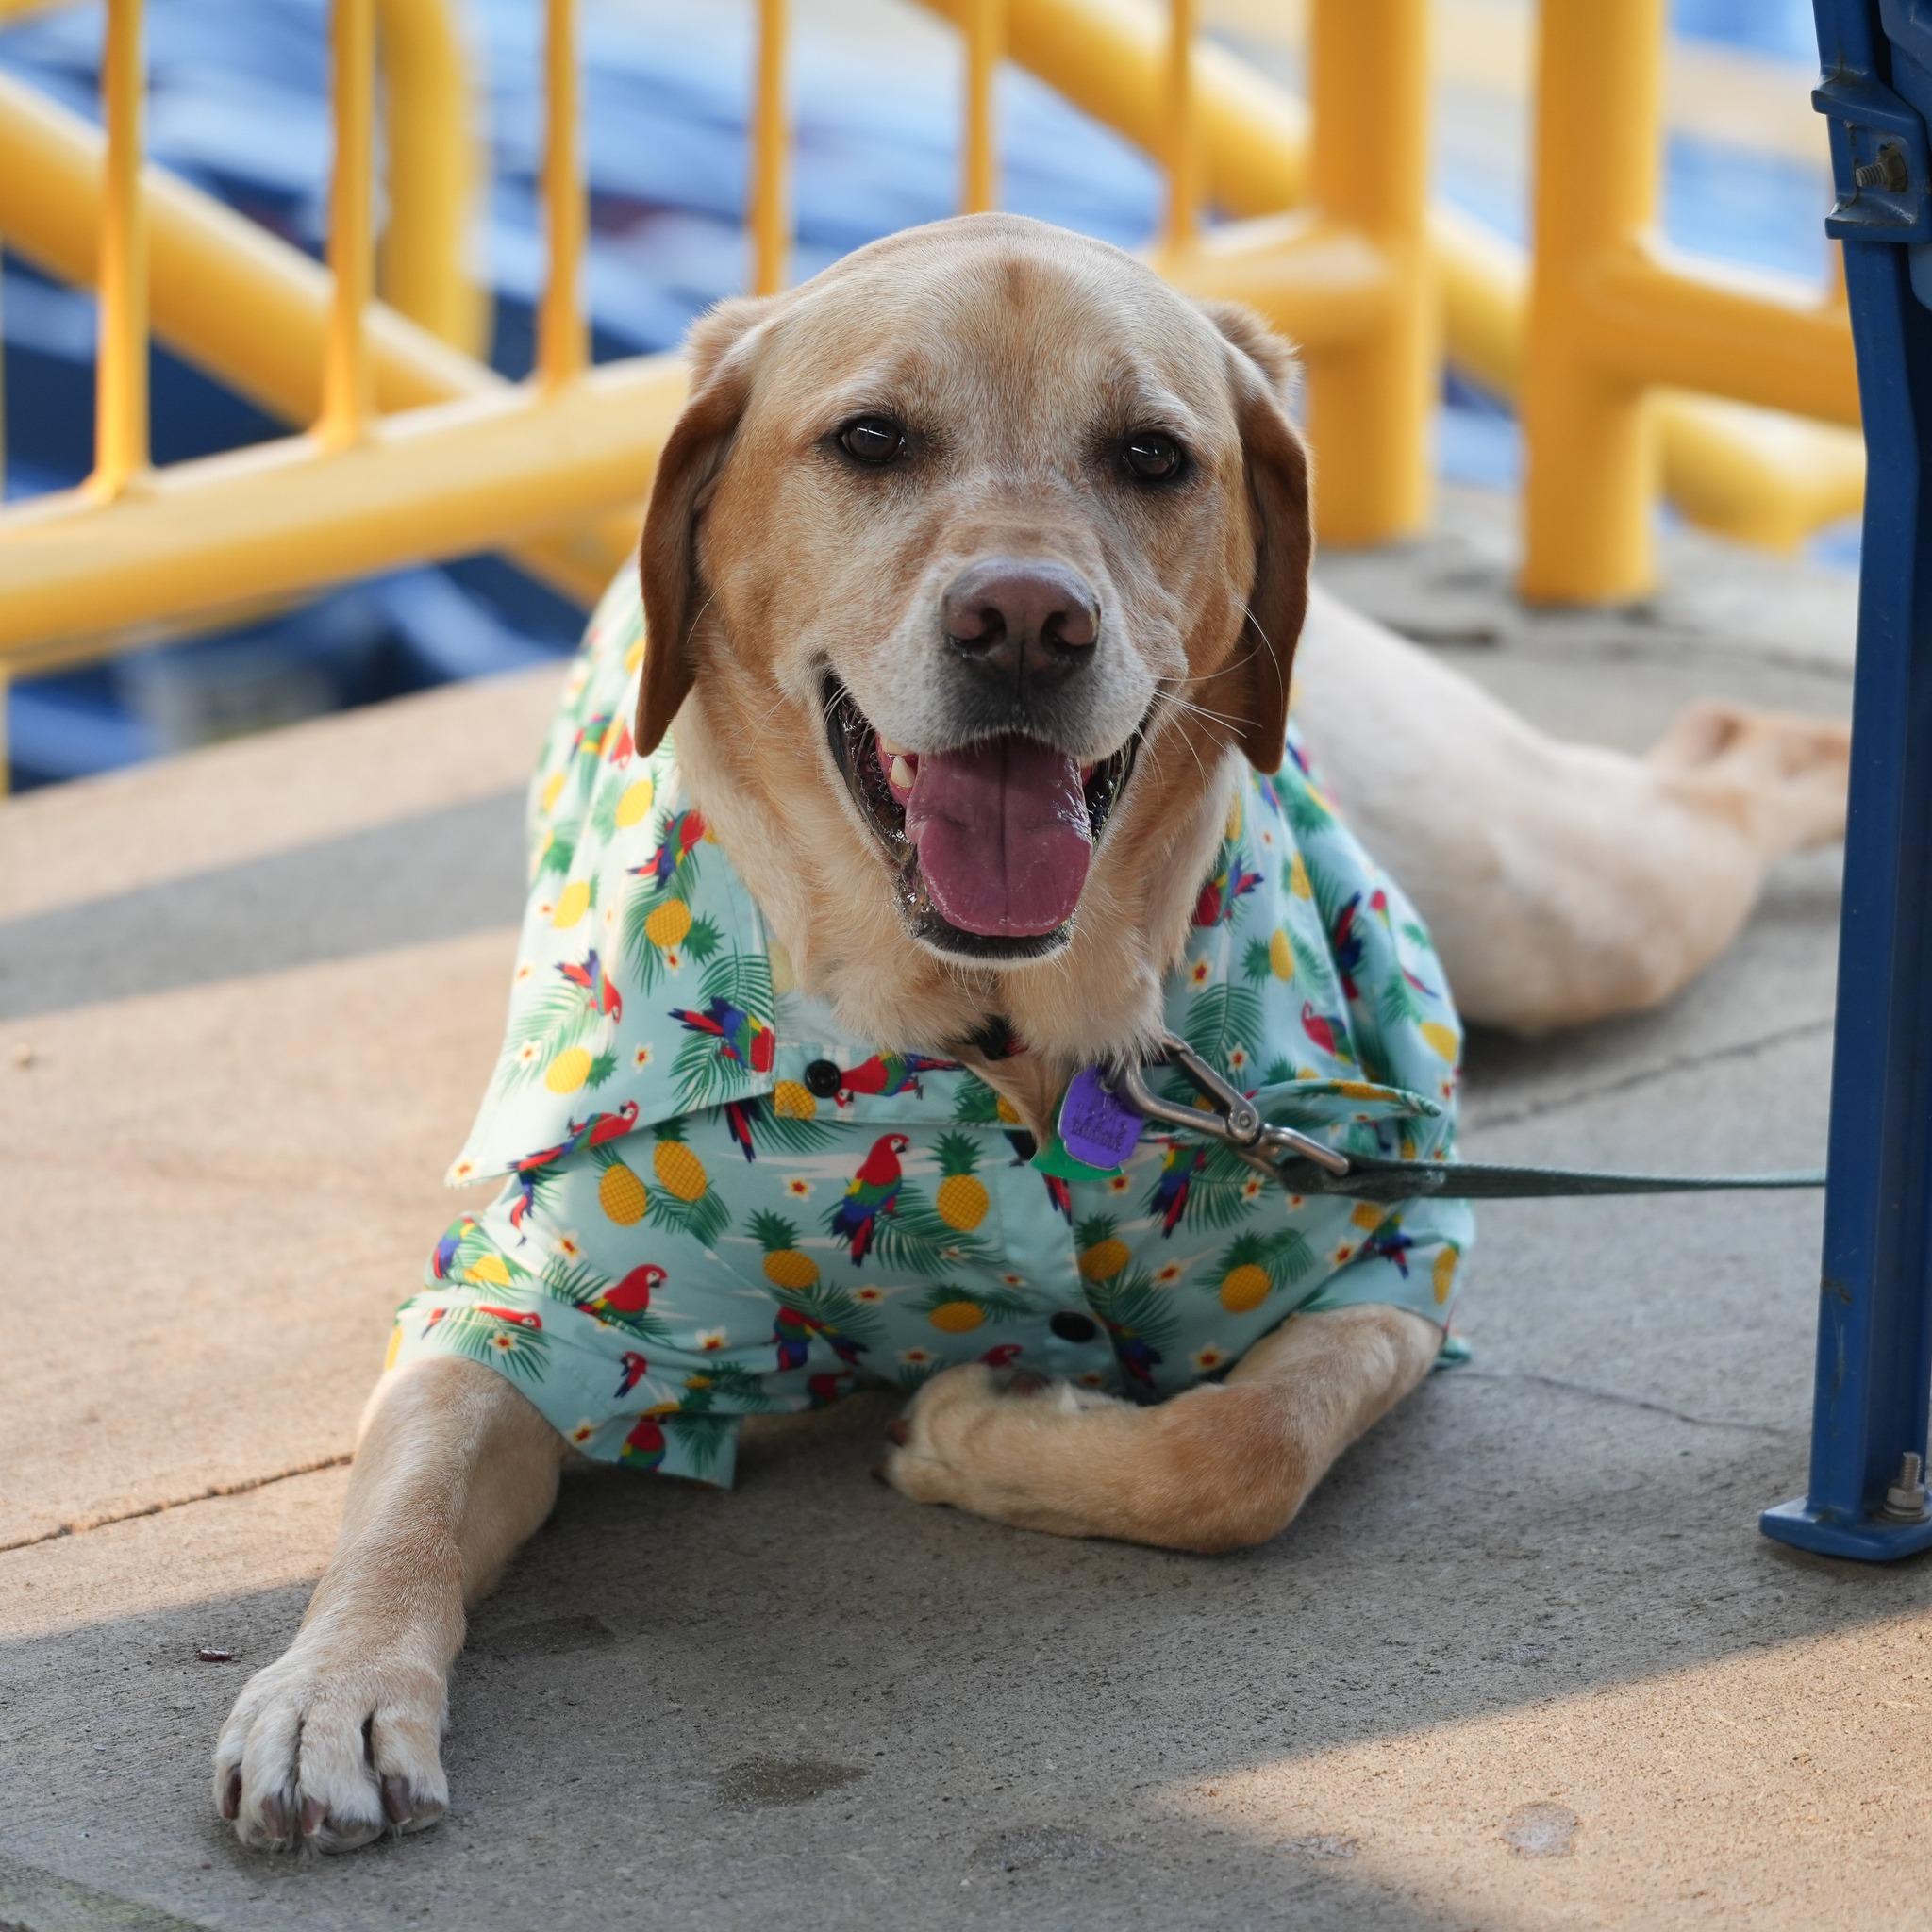 Pet Friendly Paws About Town Baseball Game